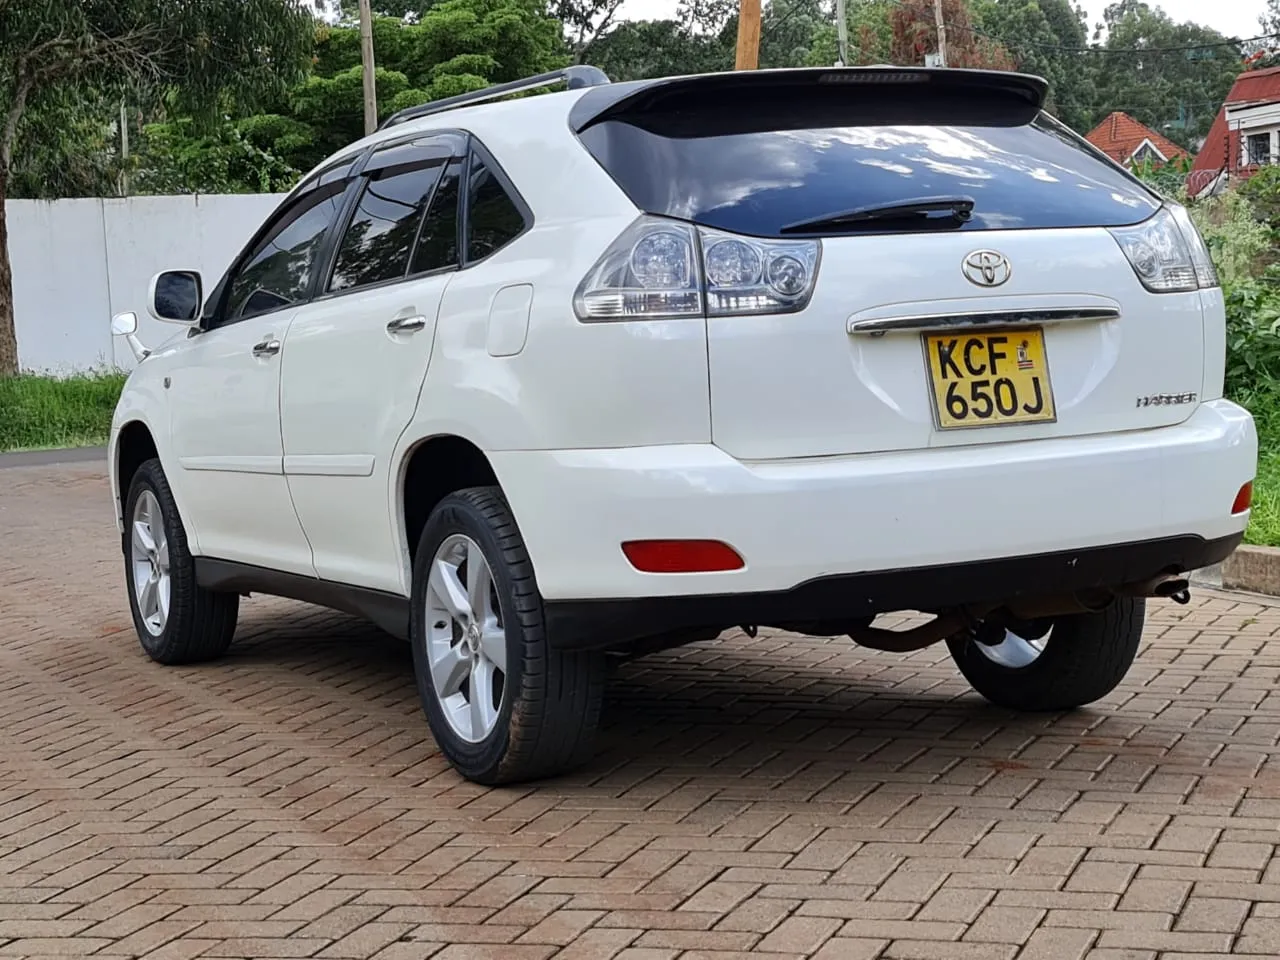 Toyota HARRIER QUICKEST SALE🔥 You Pay 40% Deposit Trade in OK EXCLUSIVE